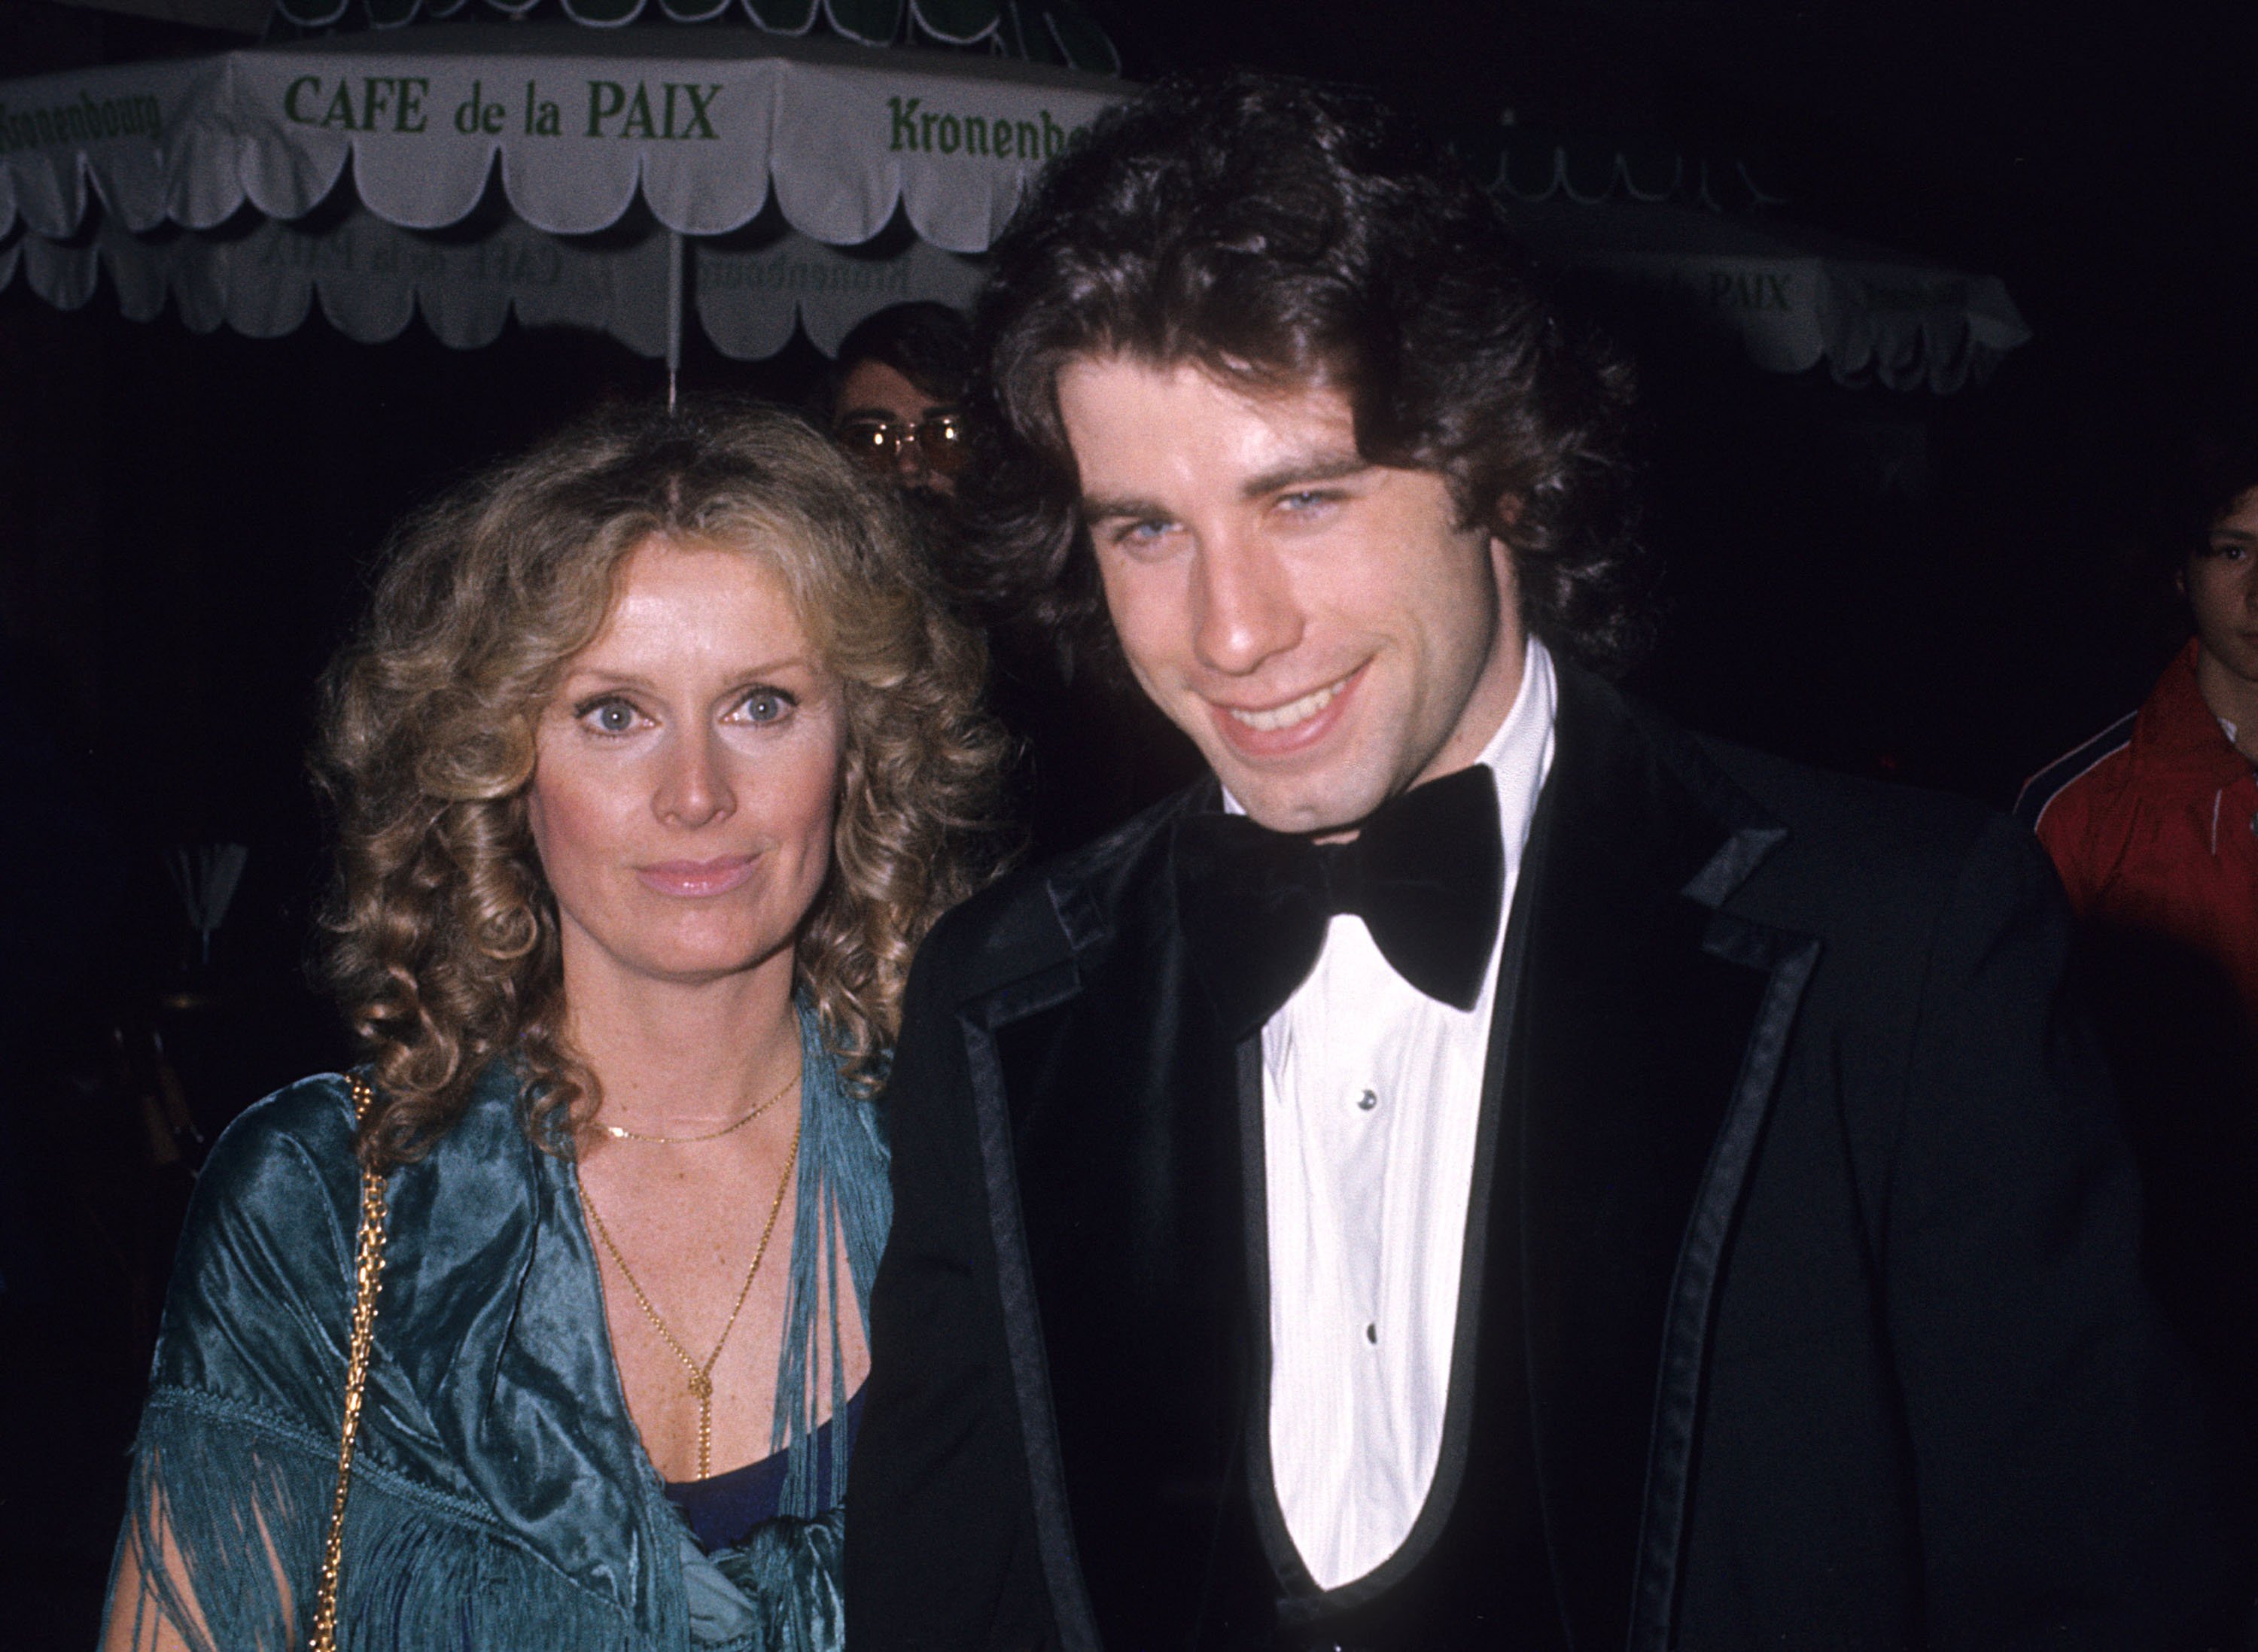 John Travolta and Diana Hyland sighting in LA on December 8th 1976 | Source: Getty Images